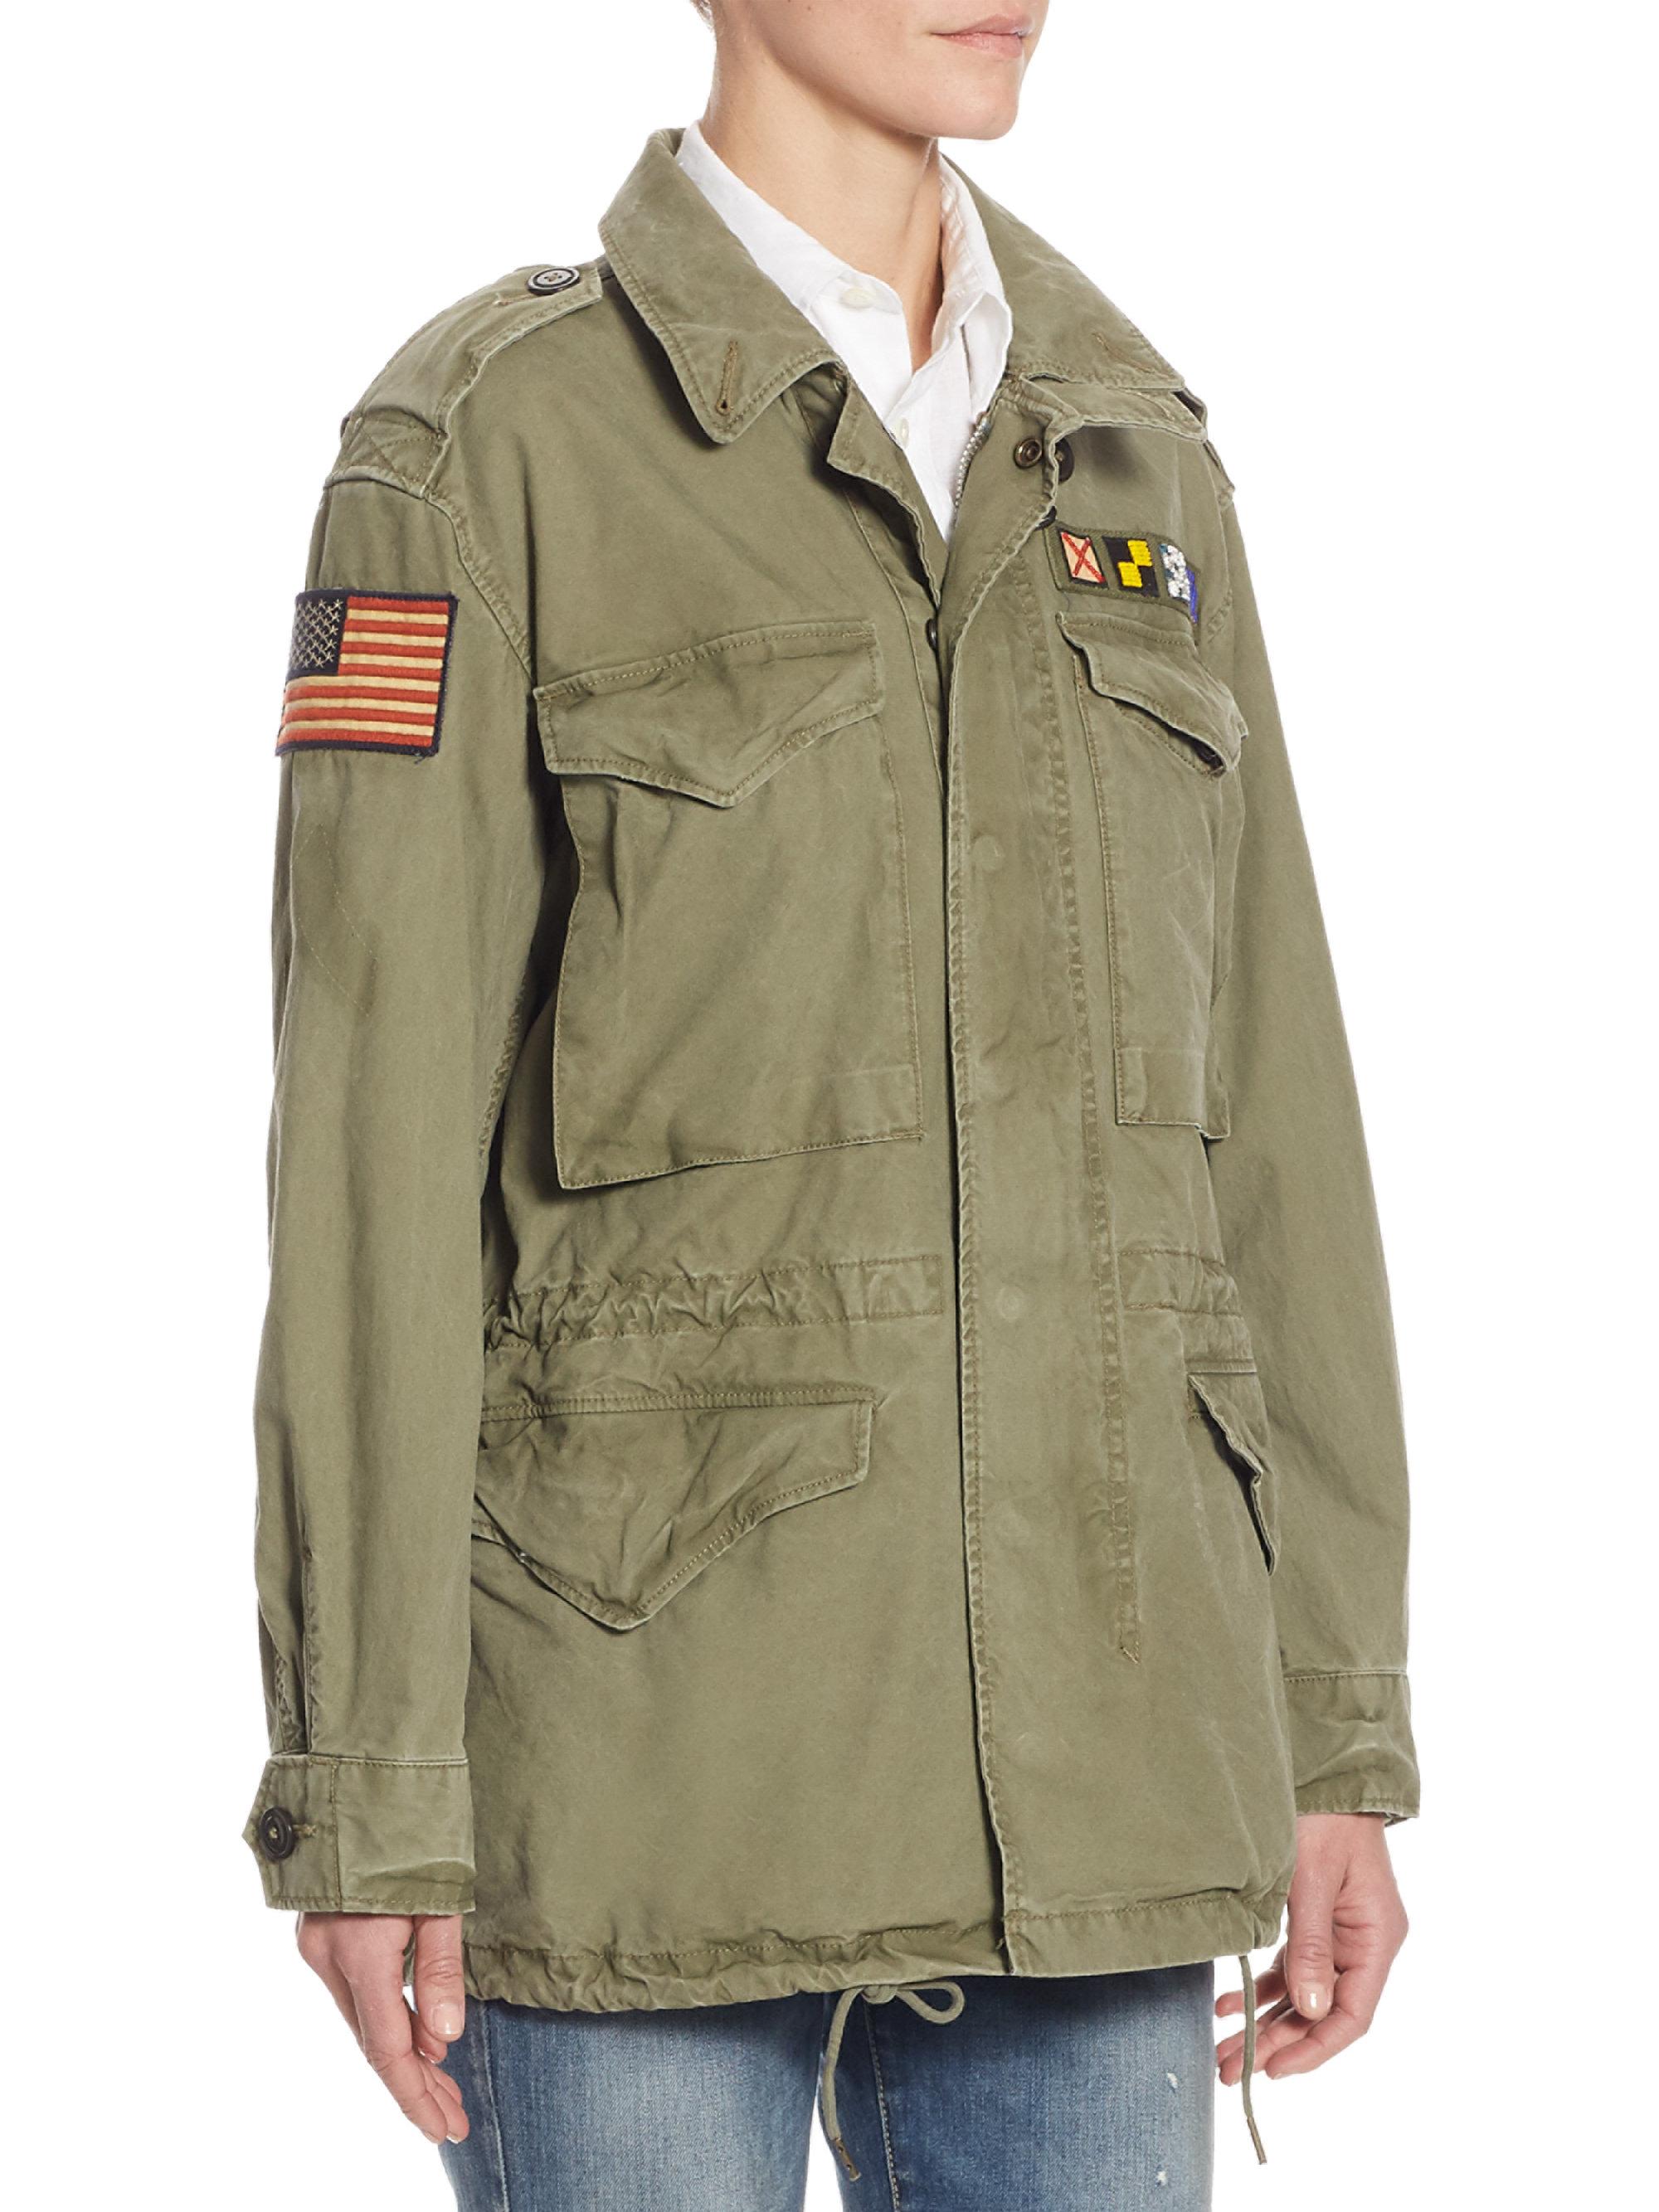 Lyst - Polo Ralph Lauren Canvas Military Jacket in Green